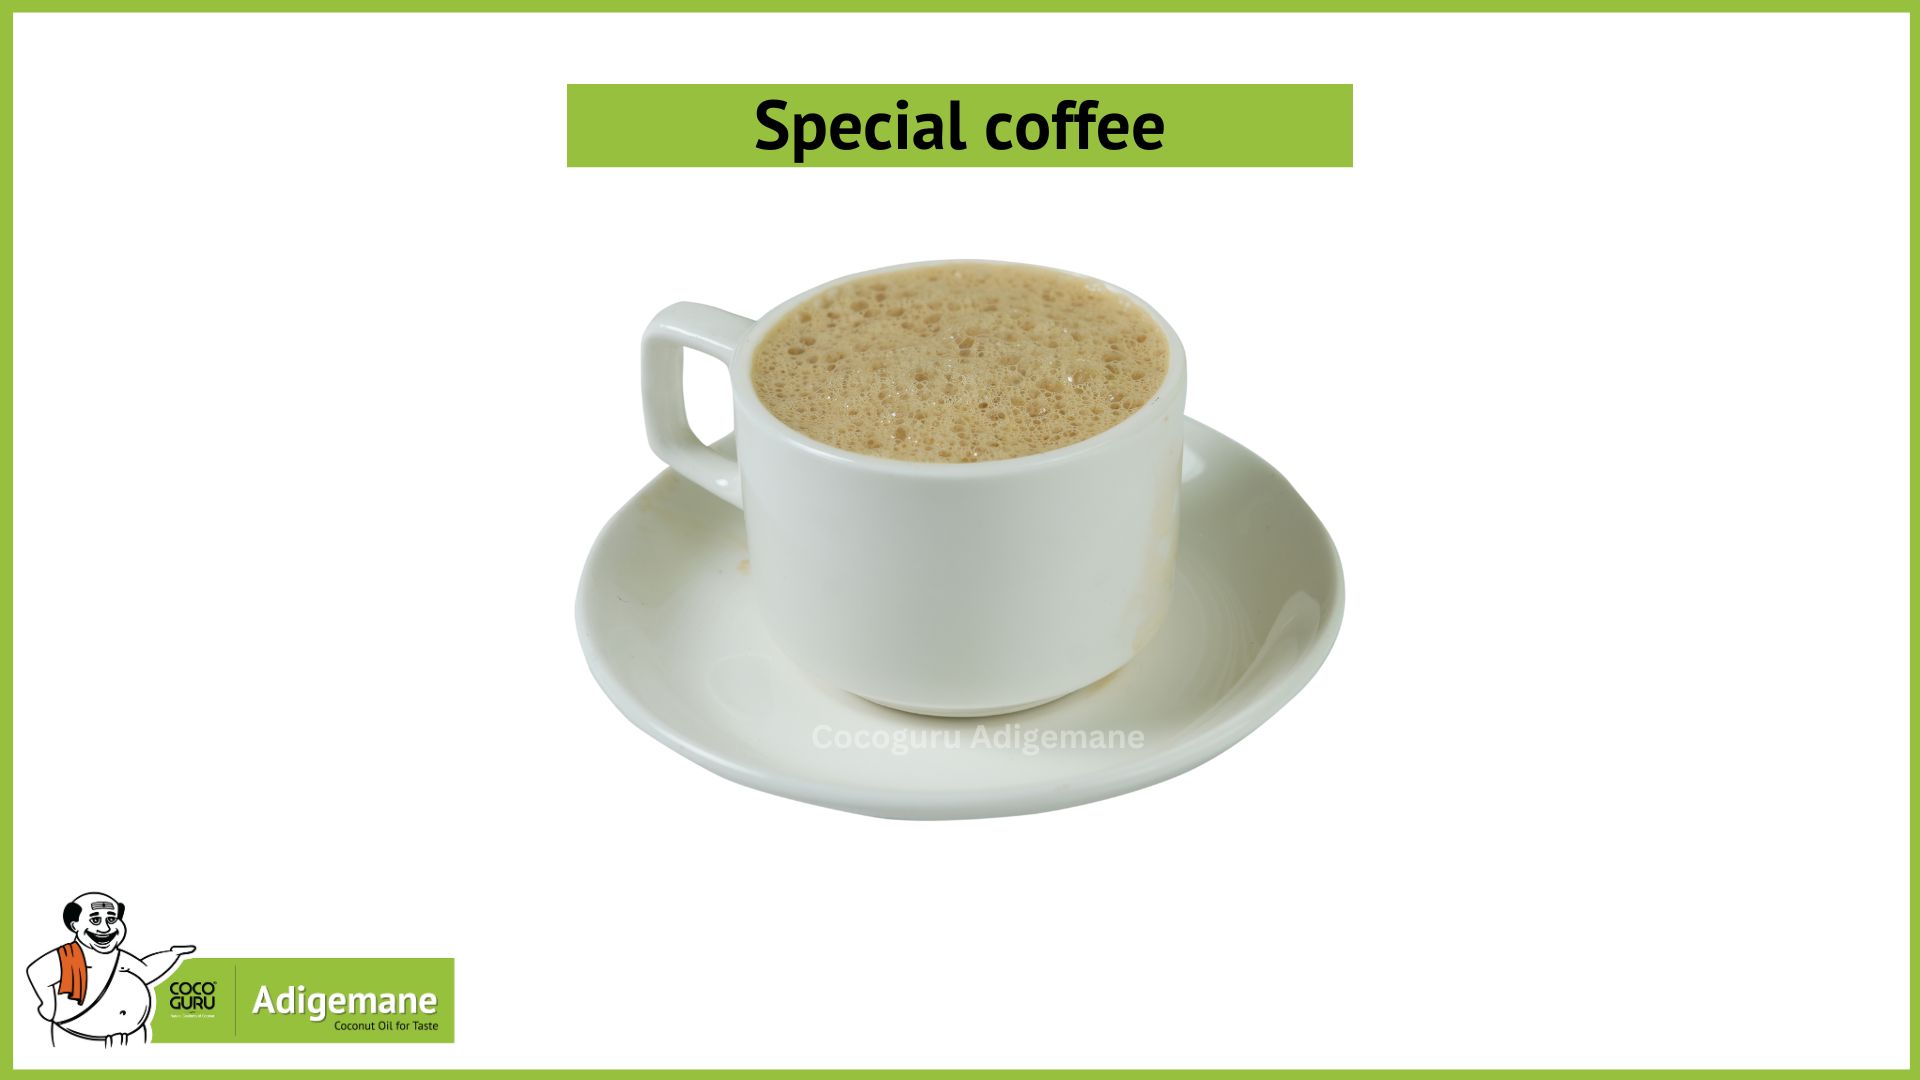 Special coffee